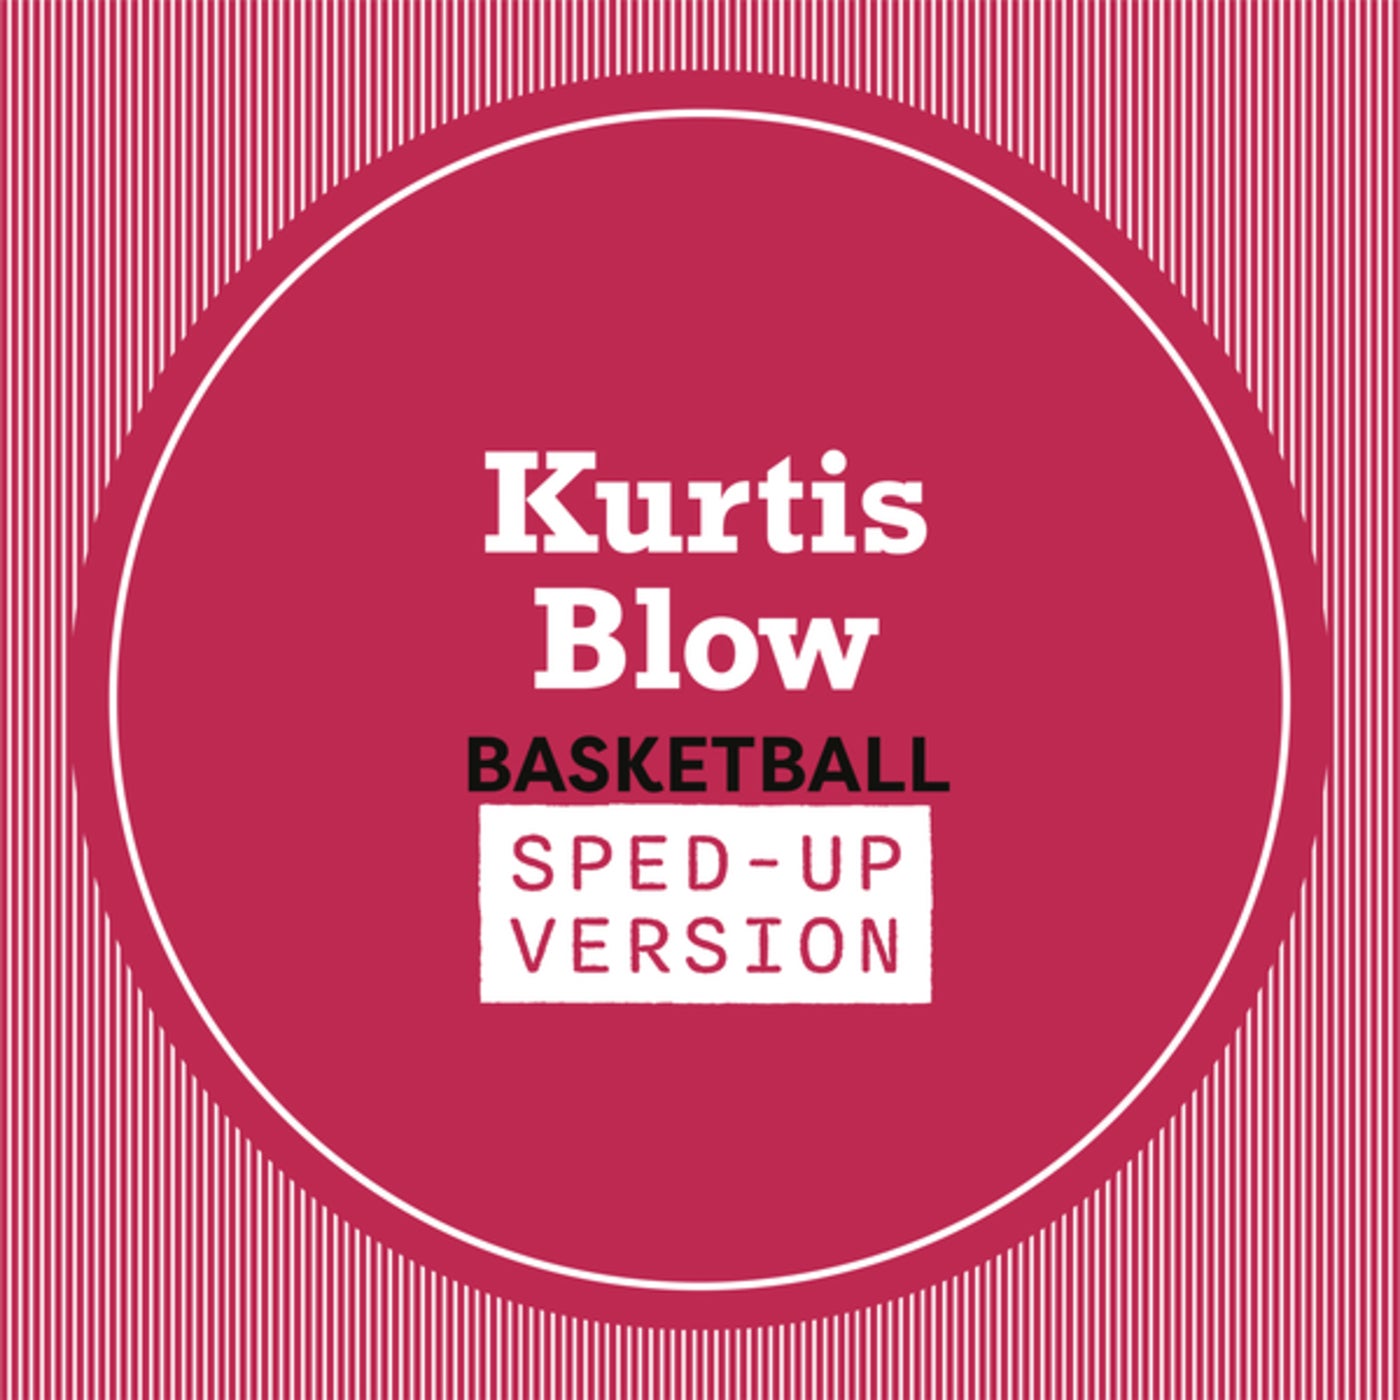 Song of the Day: Kurtis Blow 